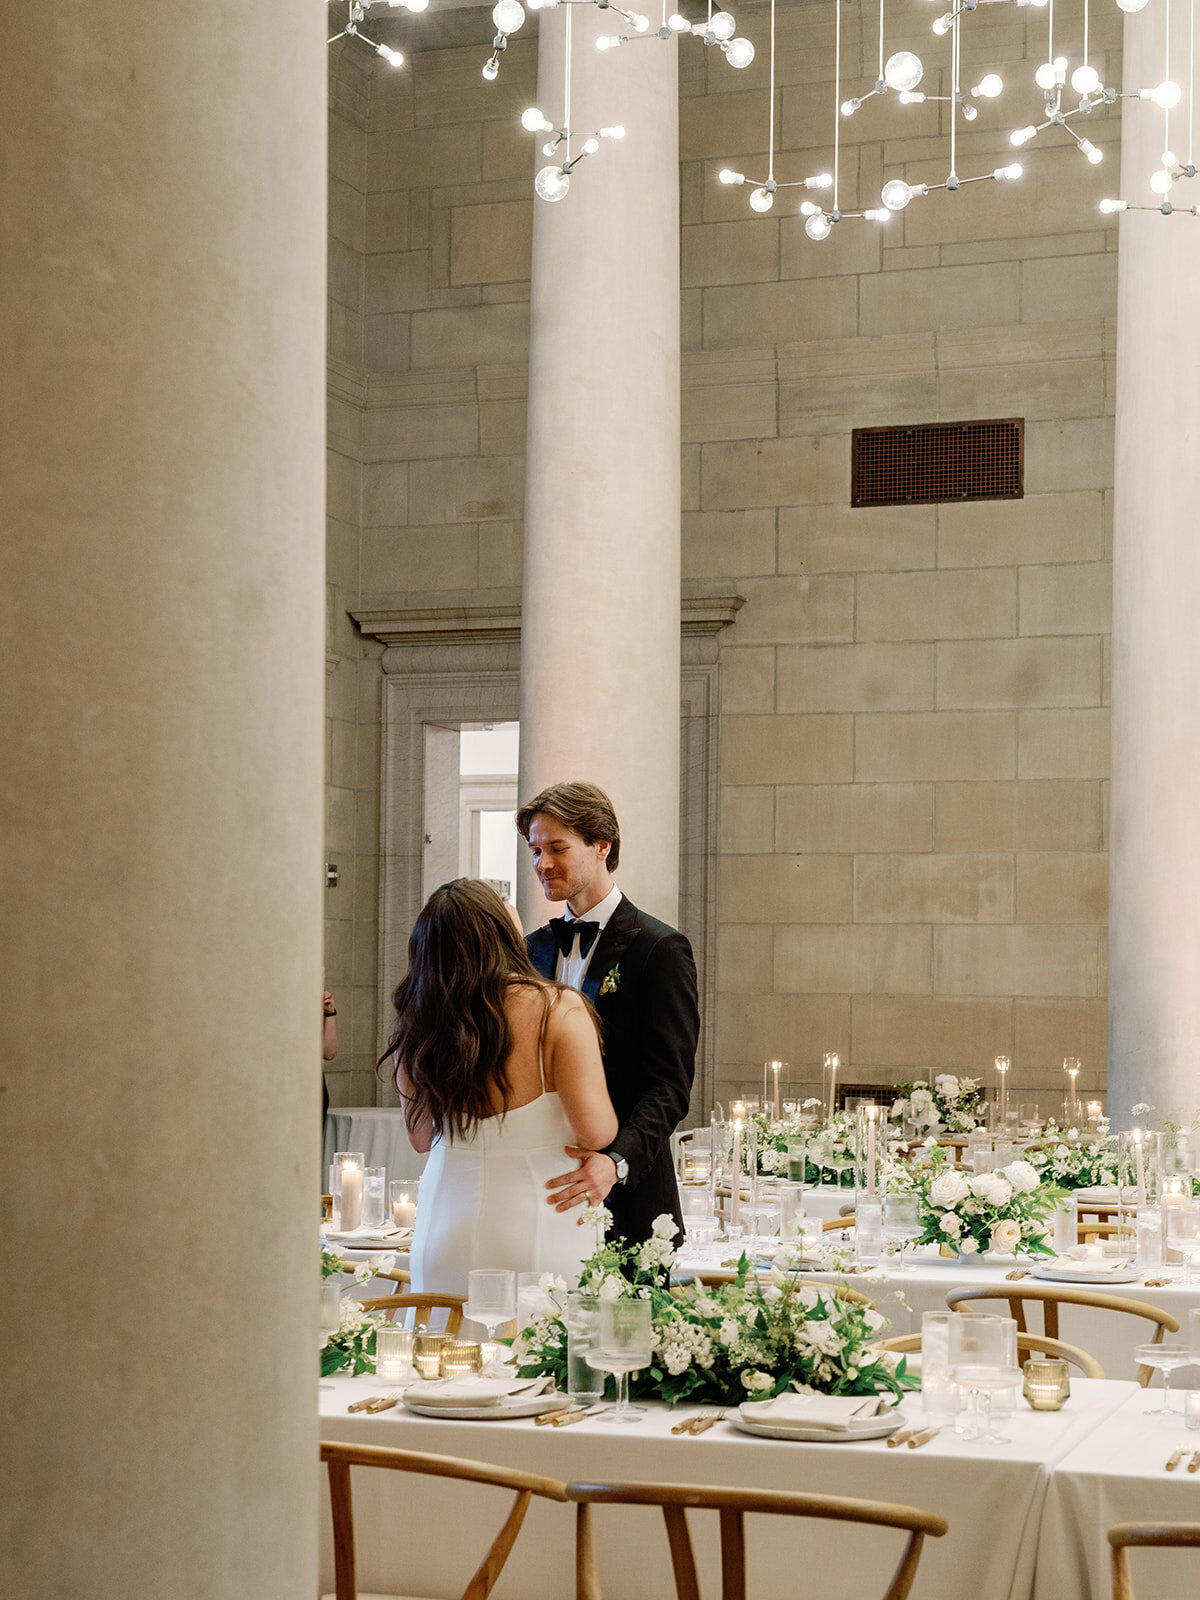 84_Kate Campbell Floral BMA Baltimore Museum of Art Wedding Vibey Reception by Nikki Daskalakis photo